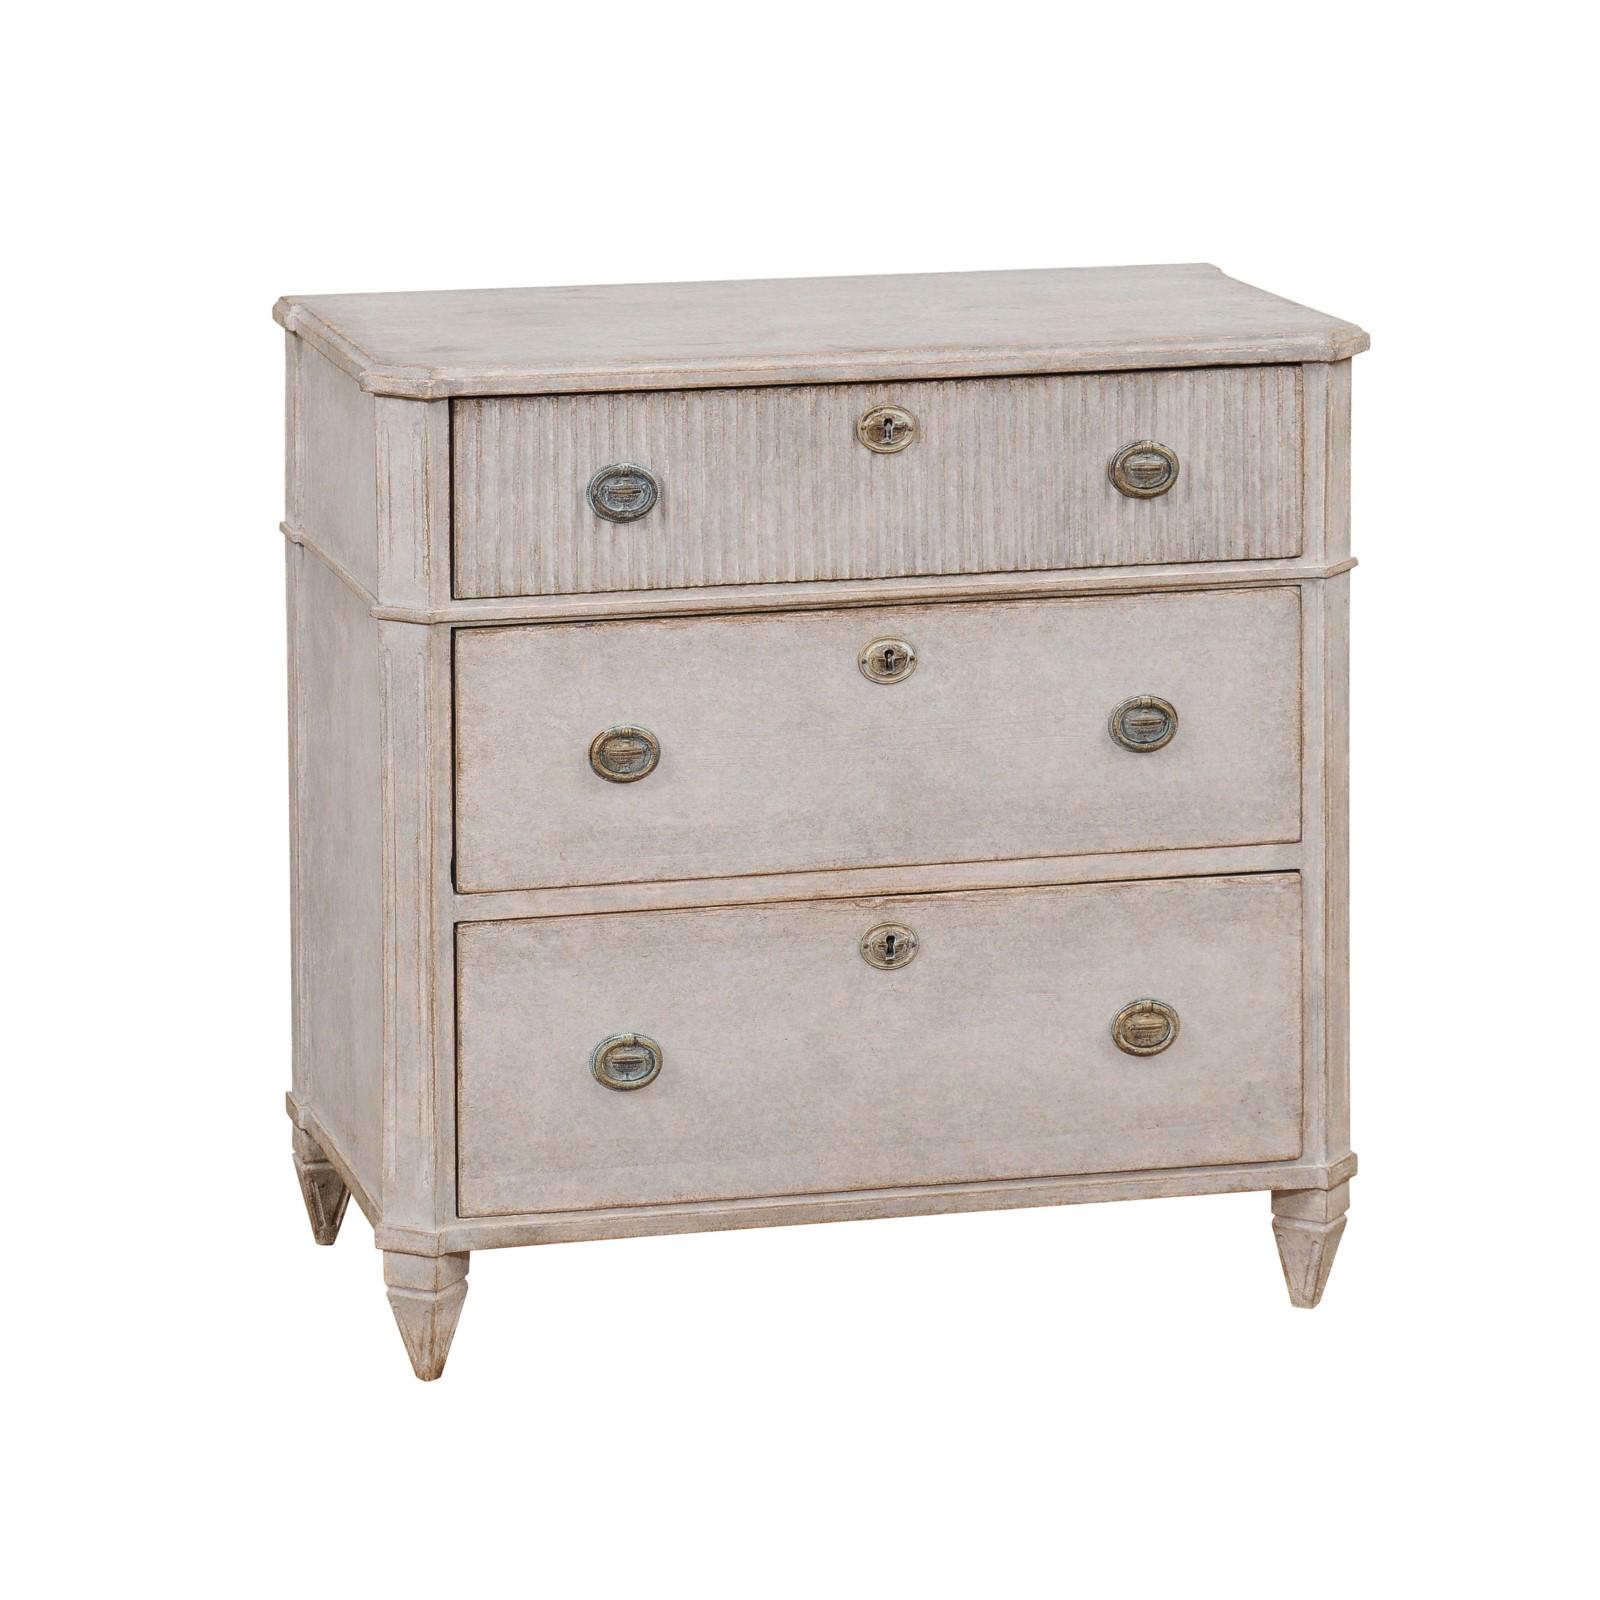 A Swedish Gustavian style gray painted chest from circa 1890 with three drawers, reeded accentuation and tapered feet. This Swedish Gustavian style chest, originating from the late 19th century, is a masterpiece of understated elegance and refined